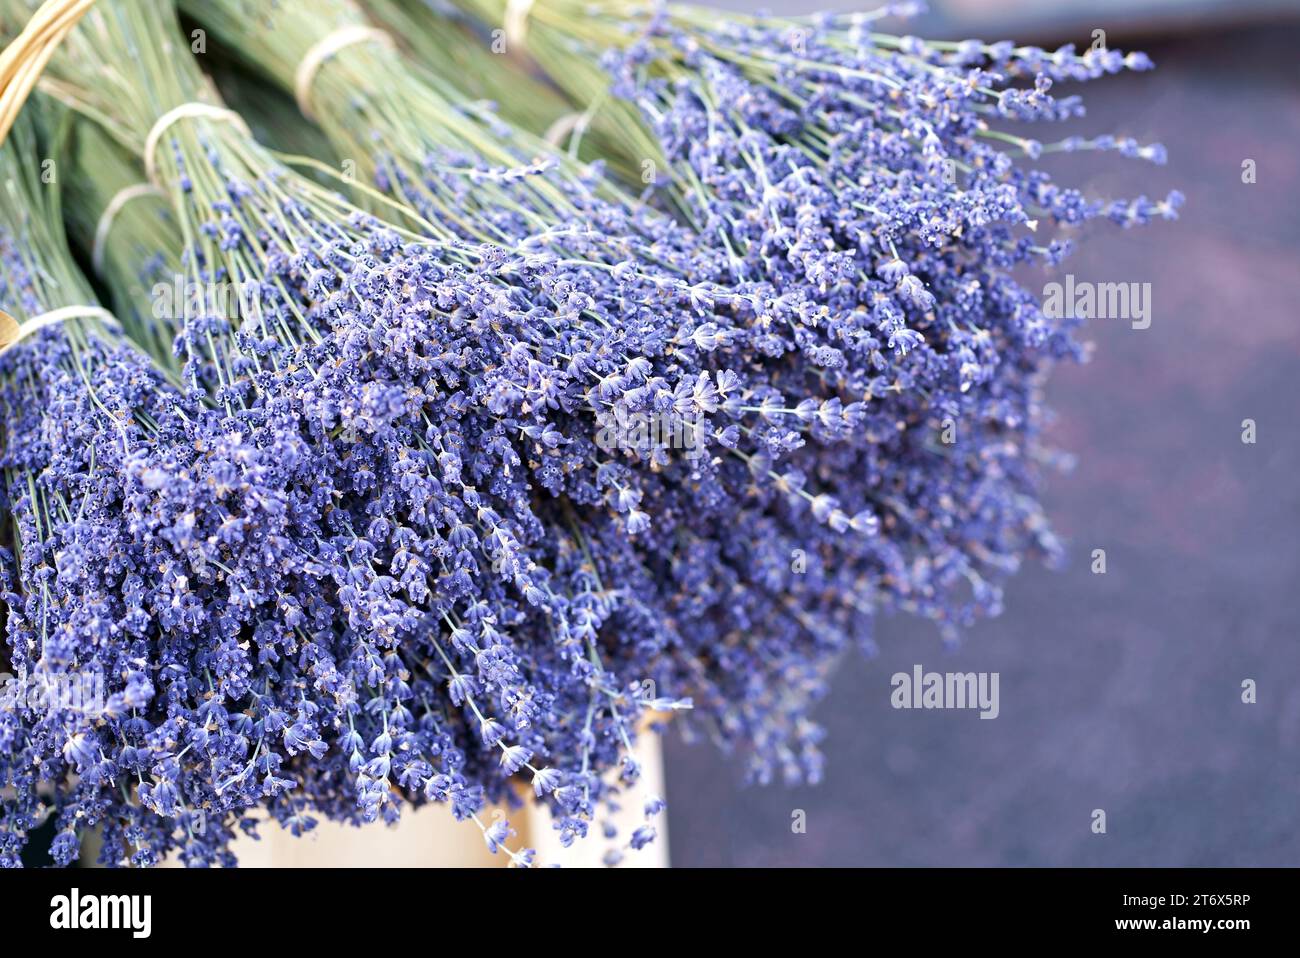 Dried lavender flowers with bracts, lamiaceae mint family plant. Light purple colour. Pattern of small natural violet elements. Aromatic mediterranean Stock Photo